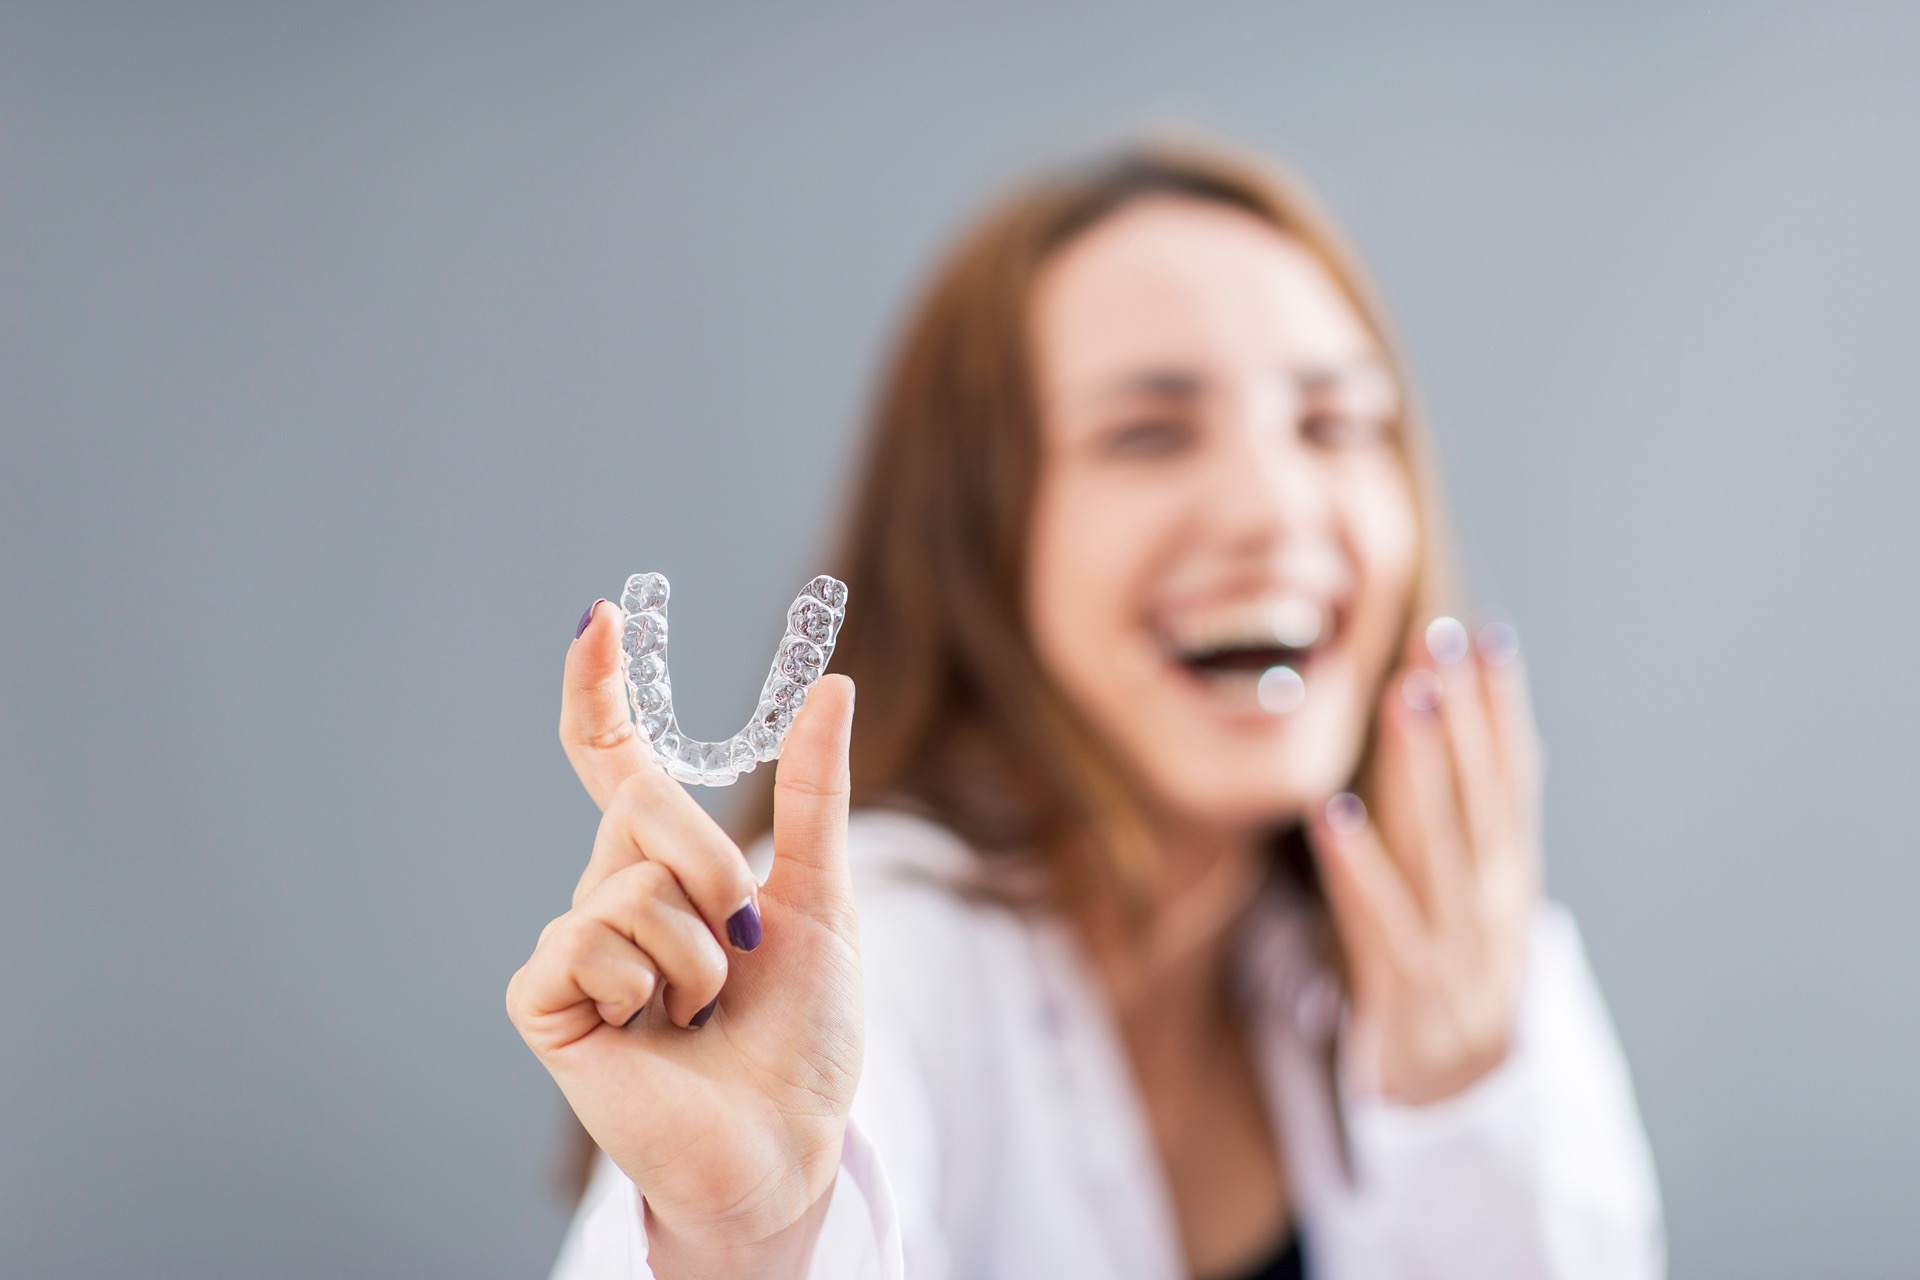 Woman is holding an Invisalign clear aligners in a studio with grey background